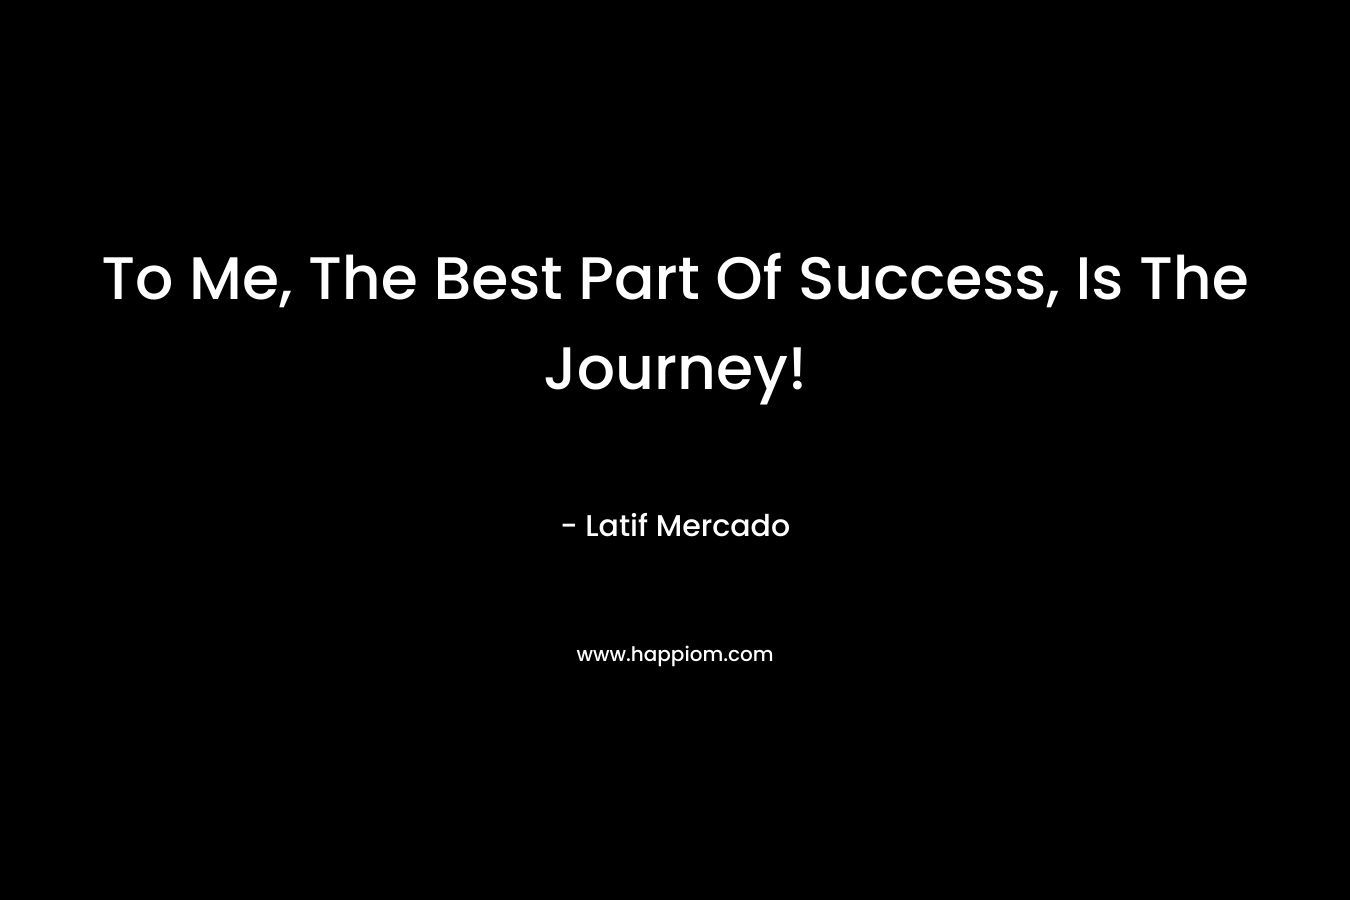 To Me, The Best Part Of Success, Is The Journey!